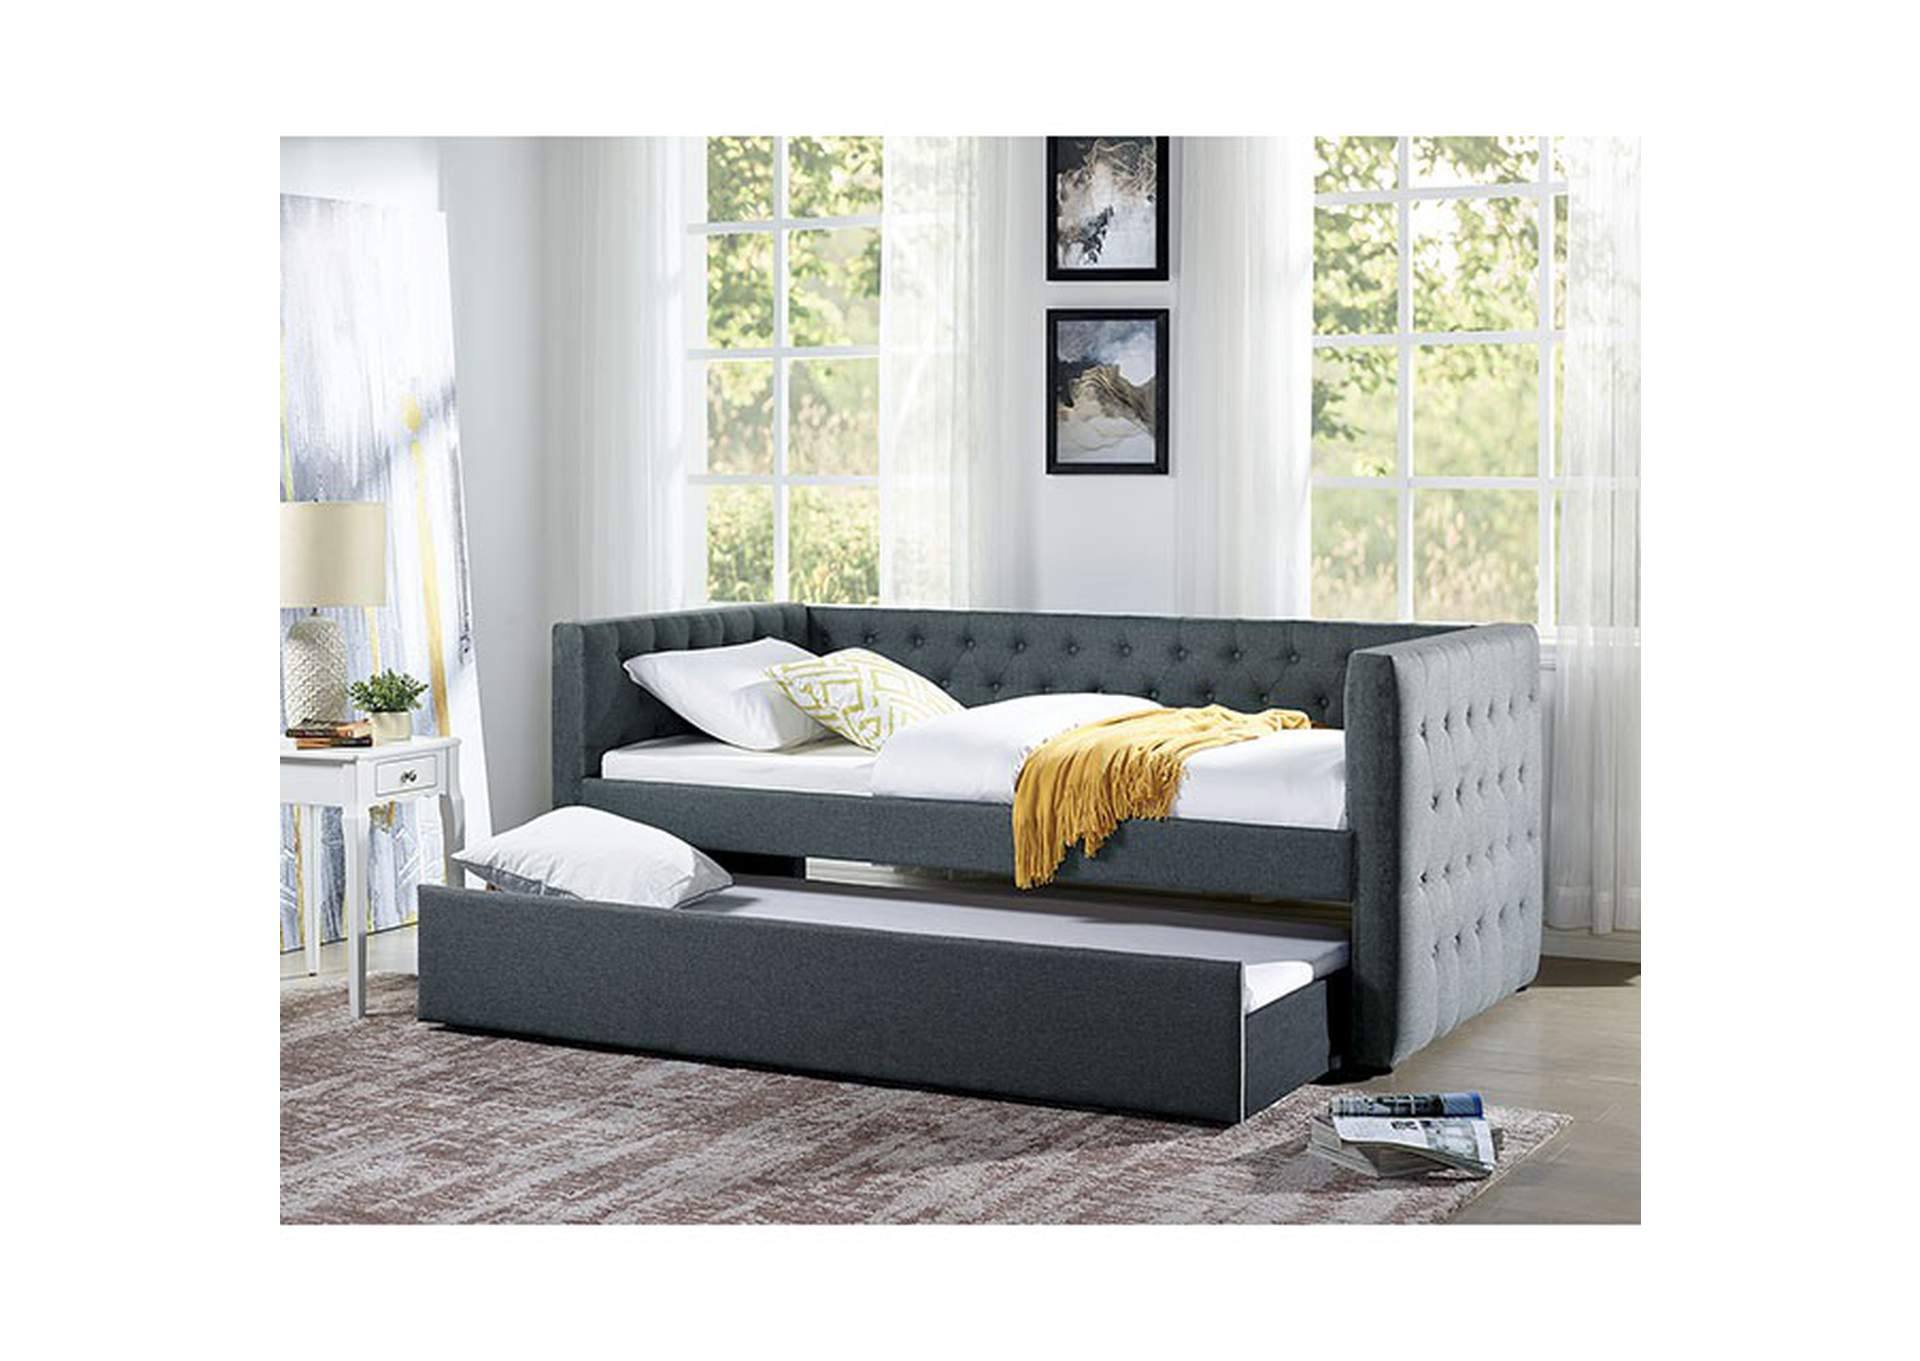 Tricia Twin Daybed,Furniture of America